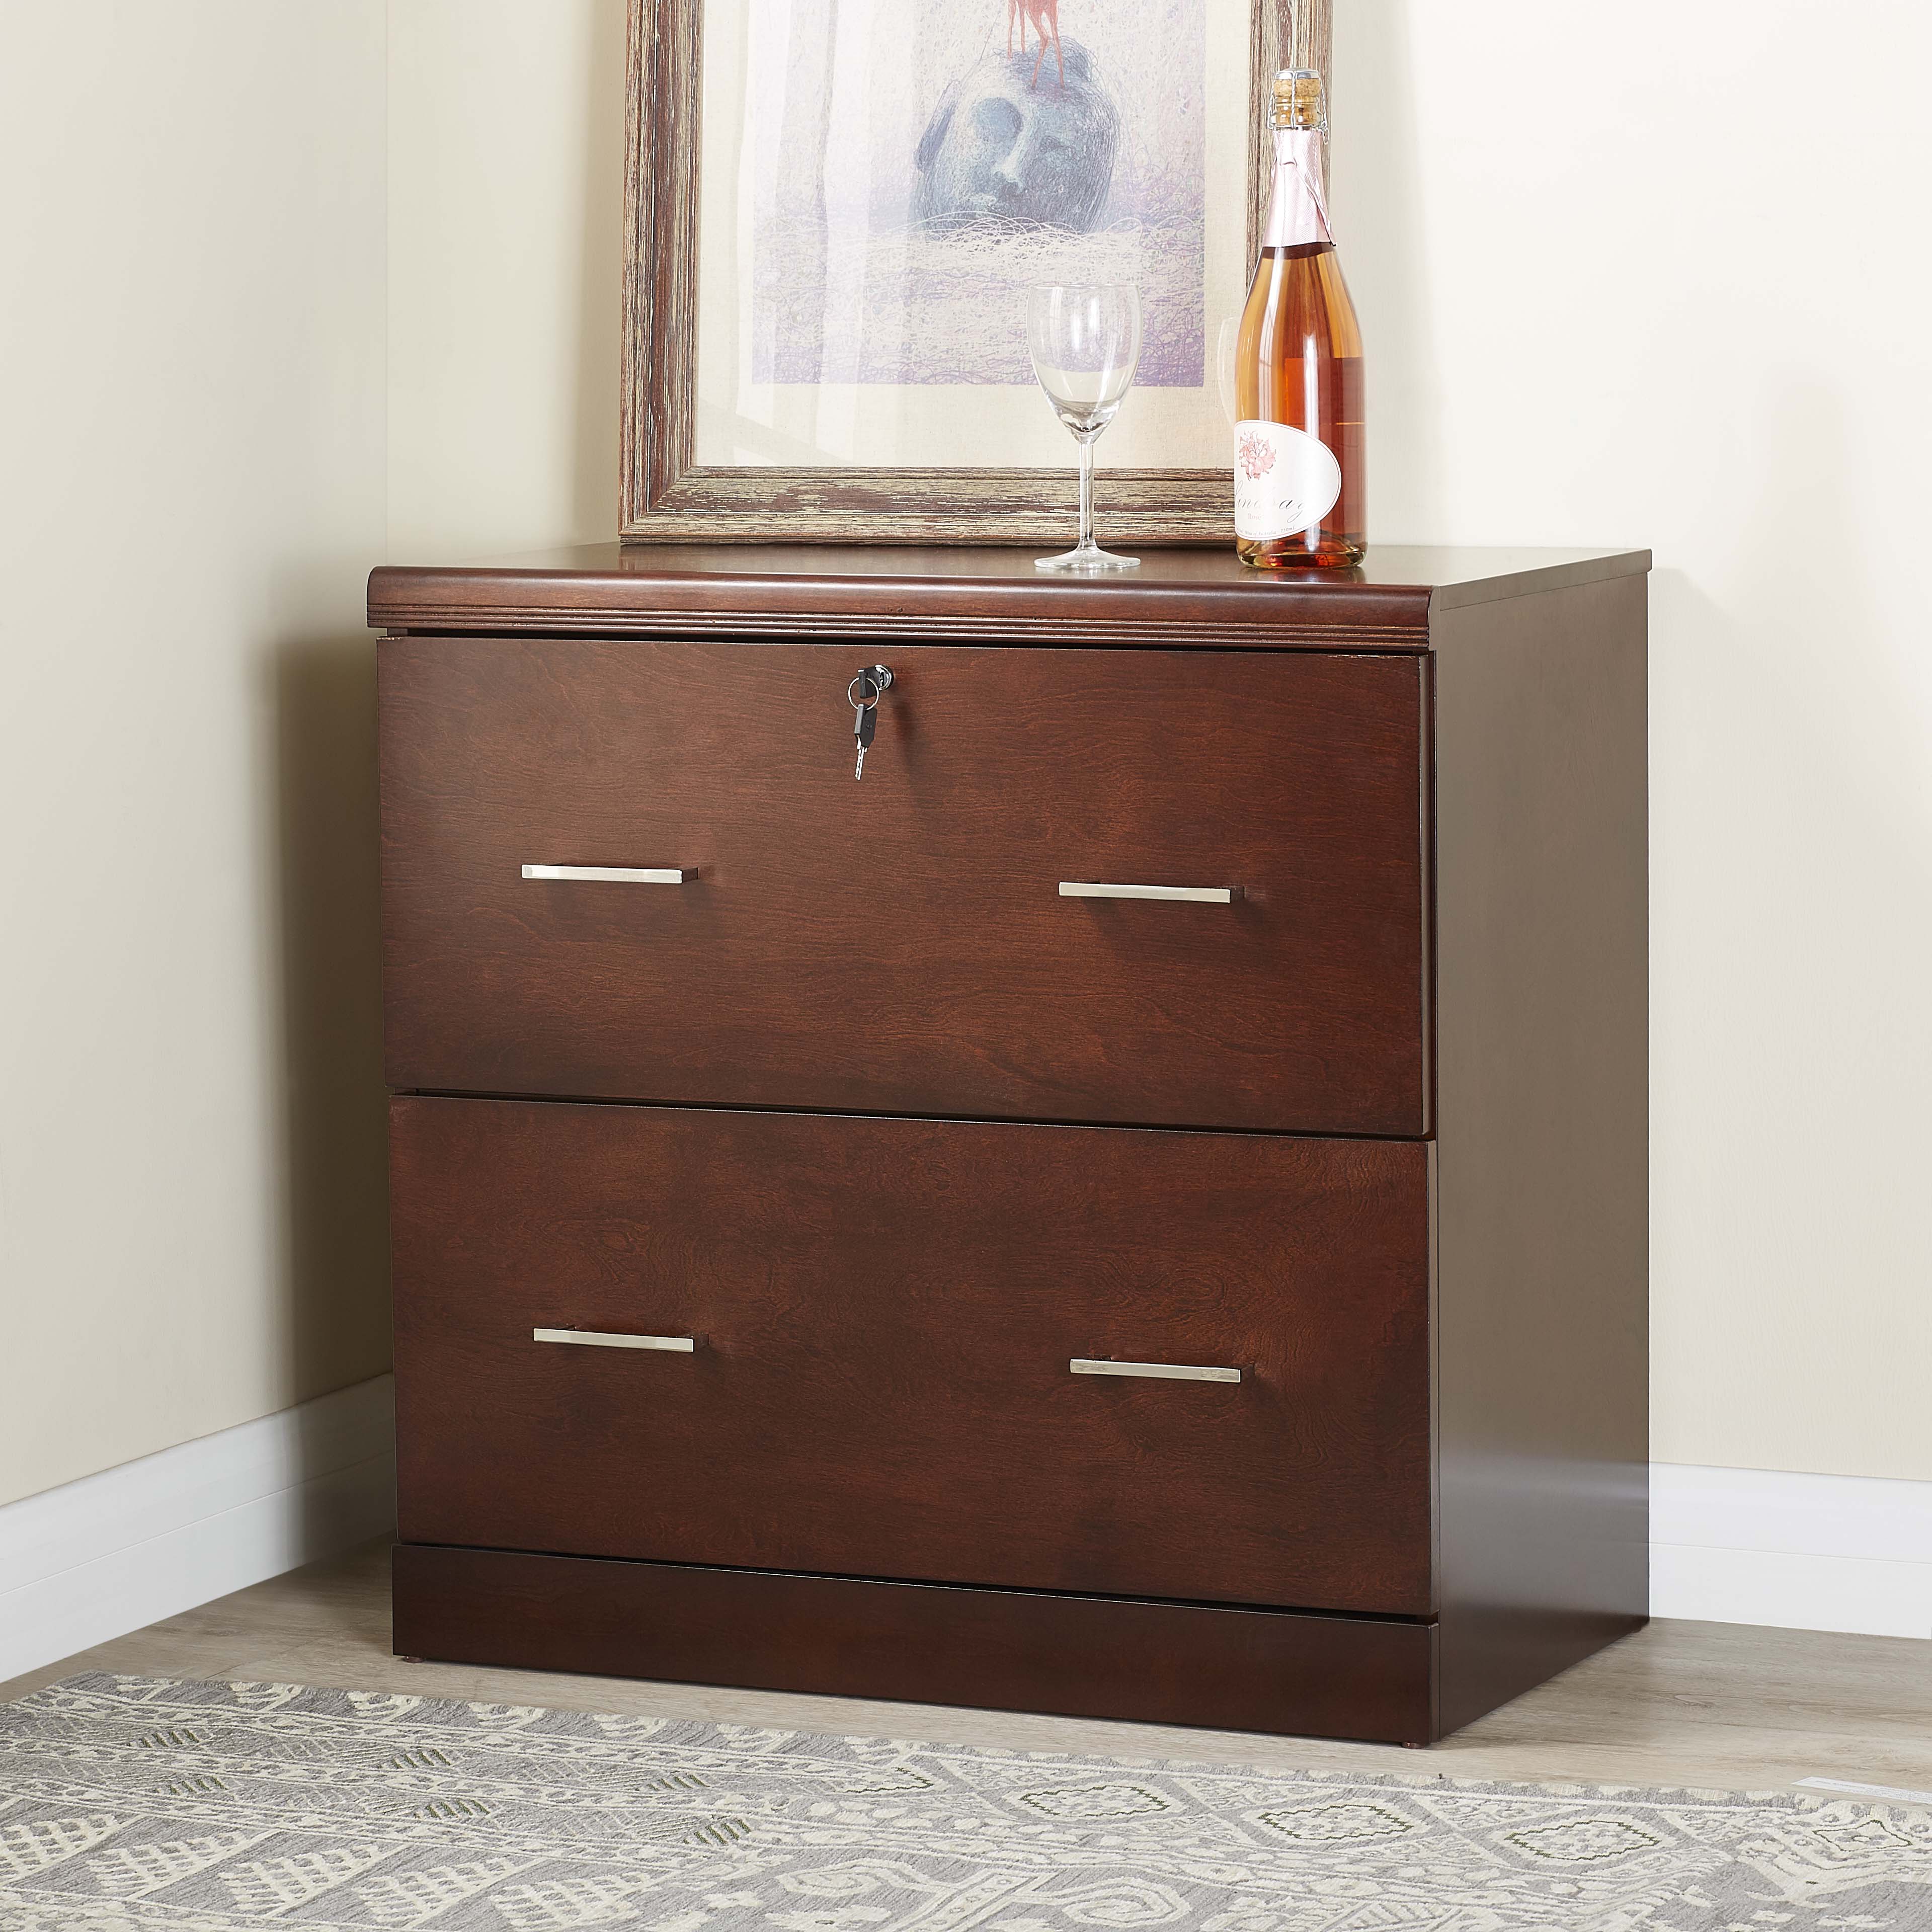 Better Homes and Gardens Wood 2 Drawer Espresso Lateral File Cabinet With Lock - image 2 of 5